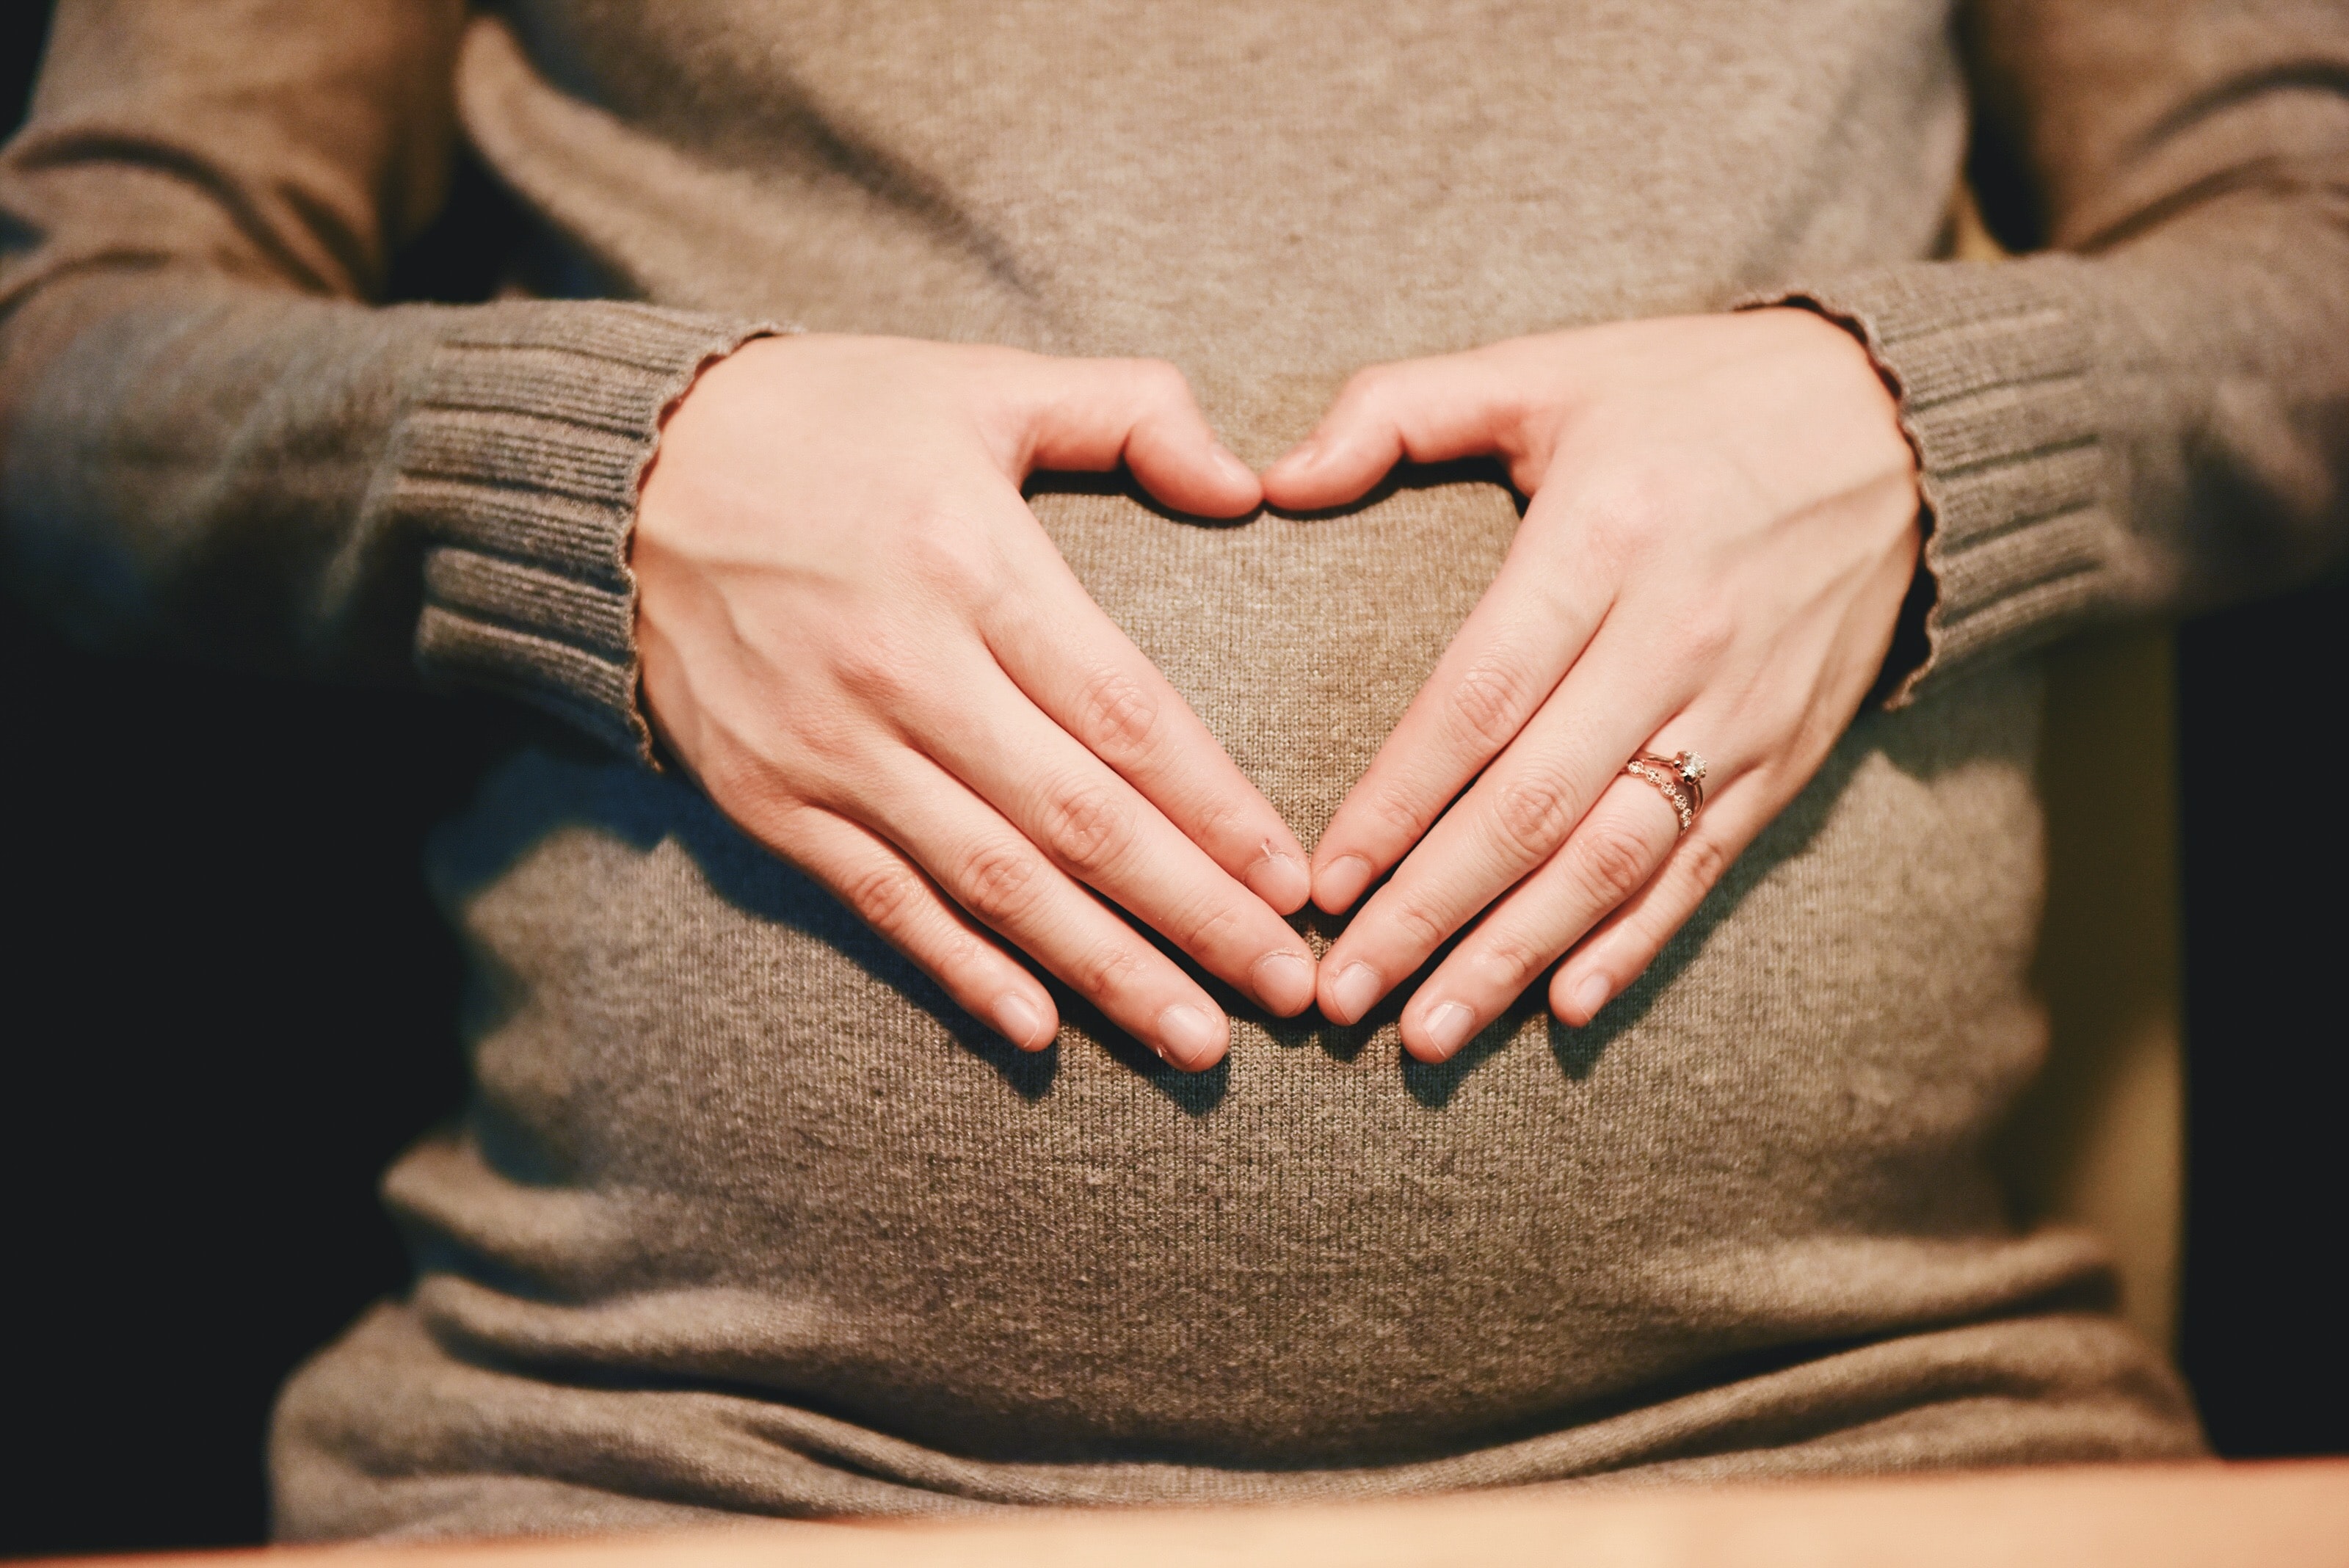 Relieving Pregnancy-Related Pain With Physical Therapy